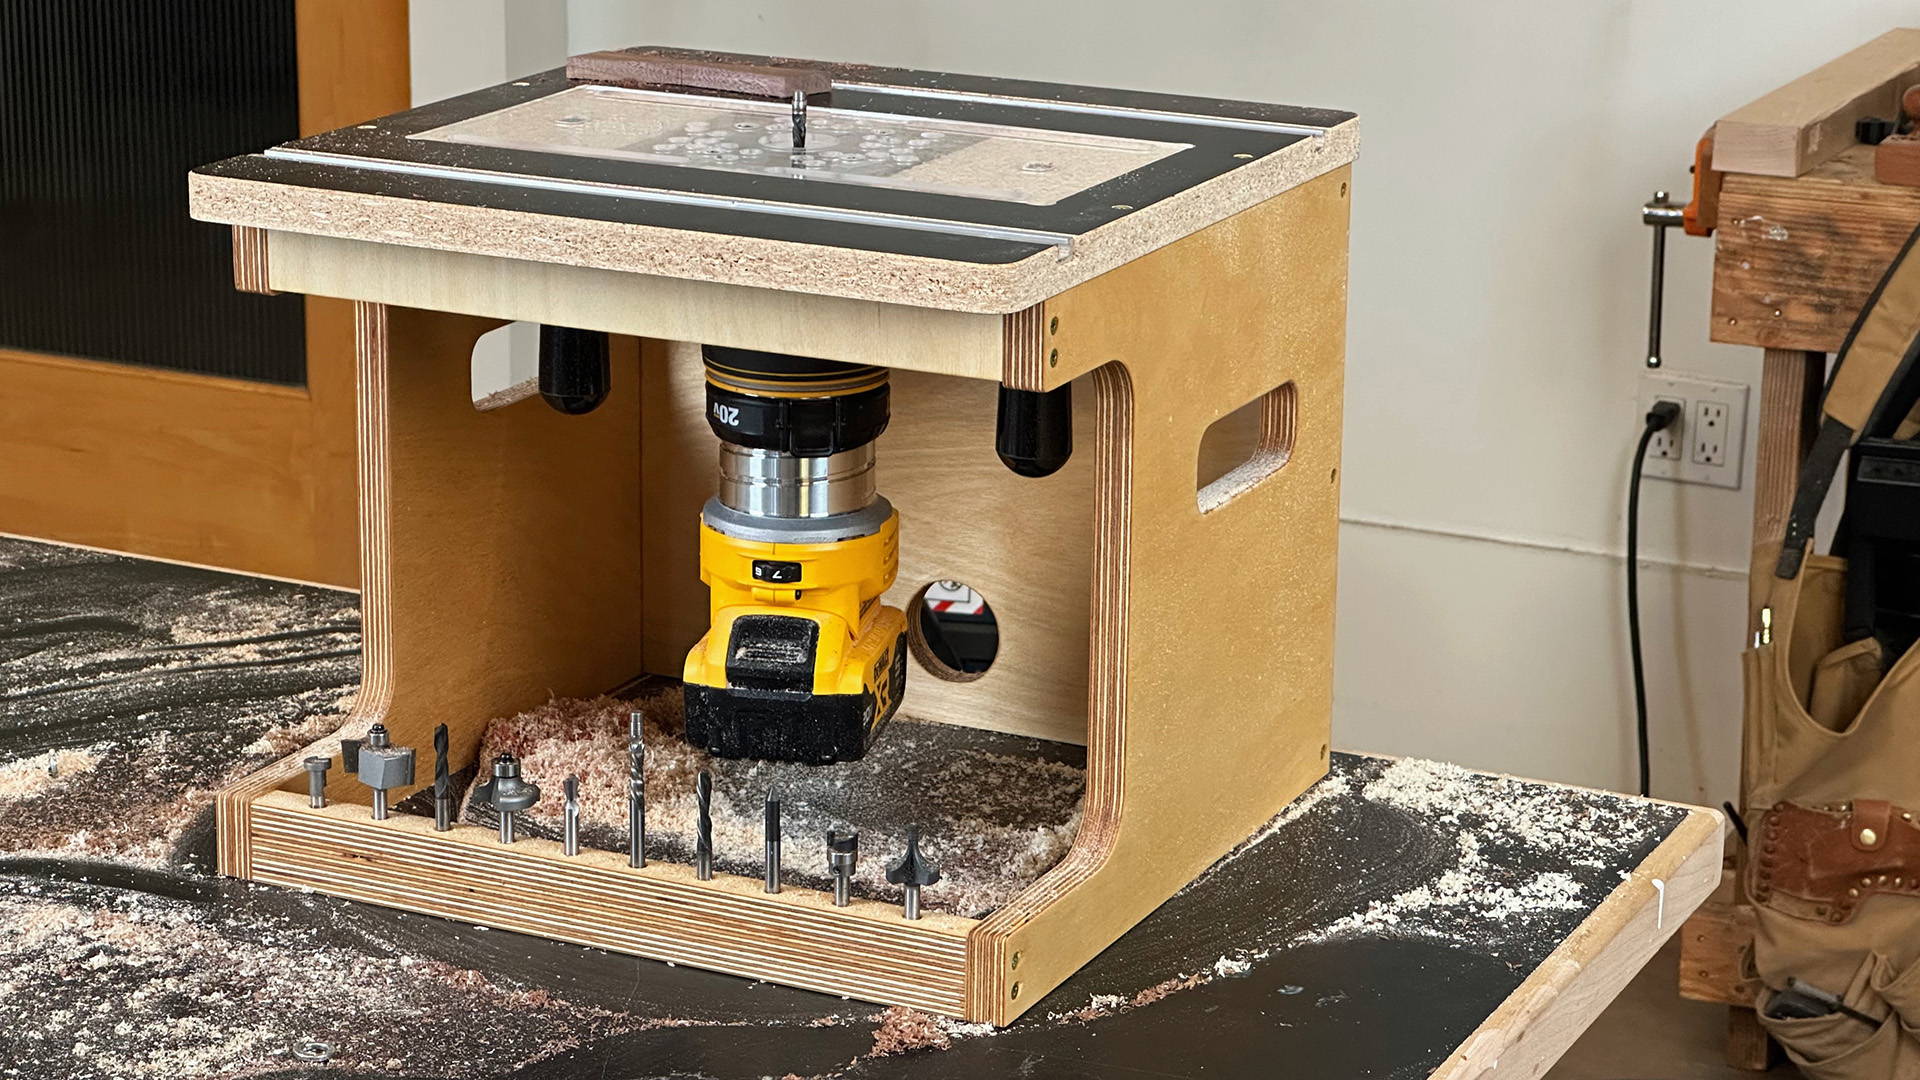 6 Tips for Clean Router Table Cuts: Stop Tearout and Burning Before it Starts